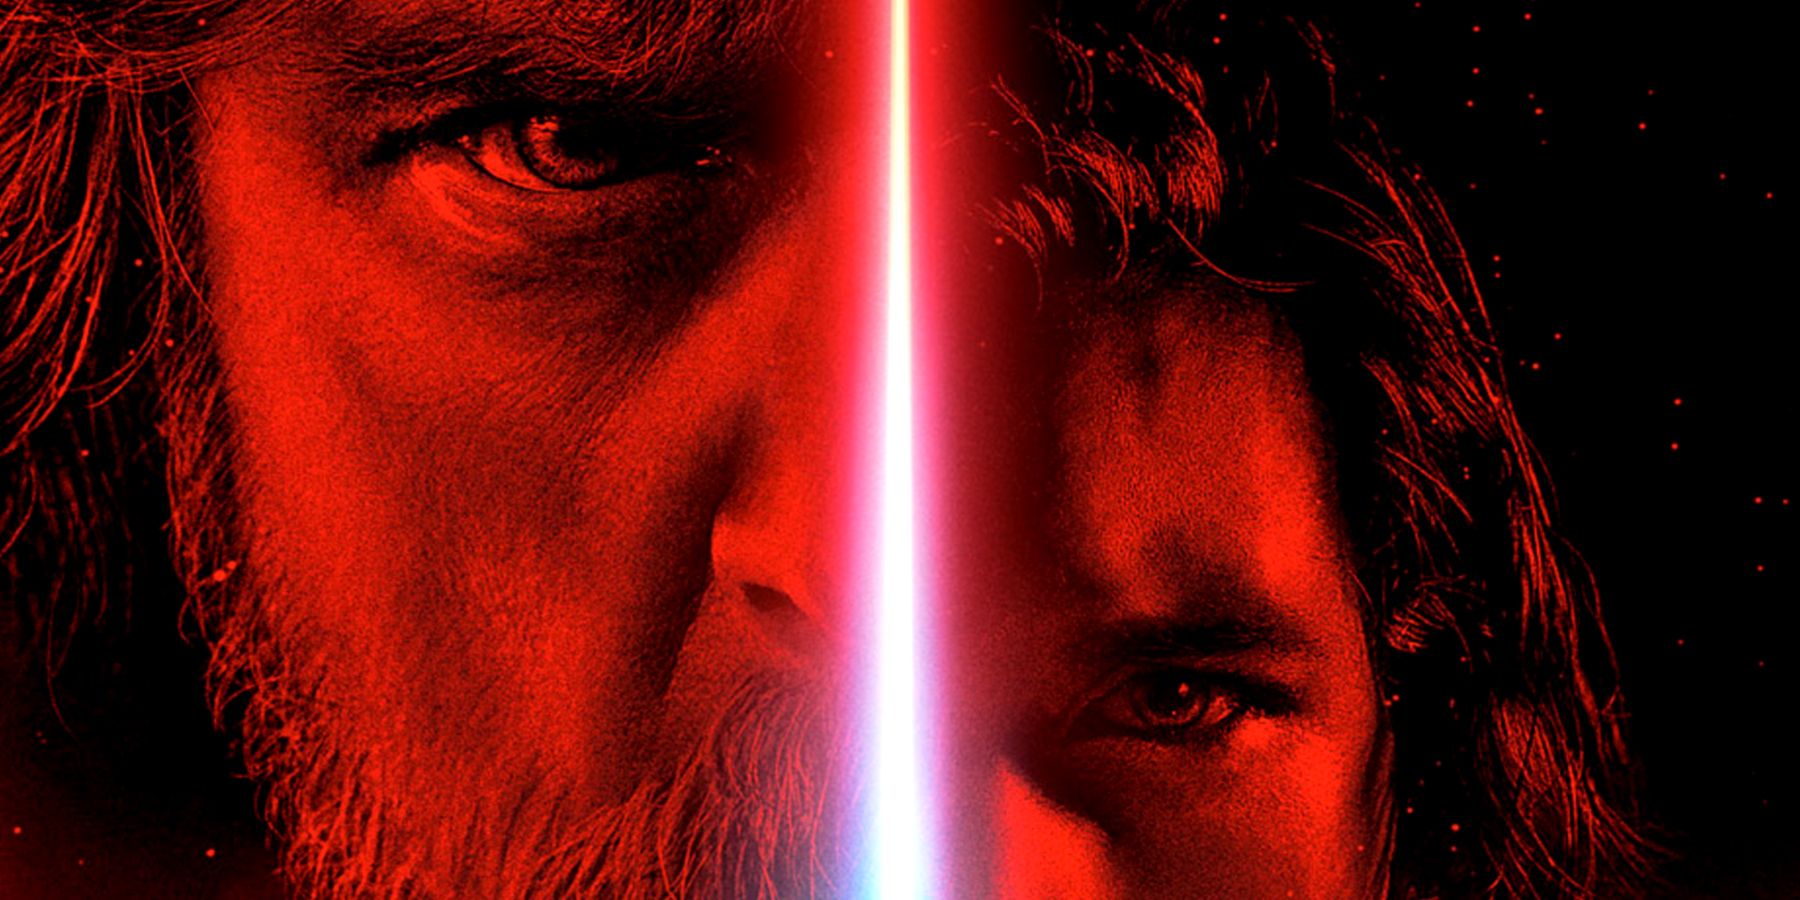 Star Wars The Last Jedi may have impressed critics, but its audience score  on Rotten Tomatoes is shockingly low